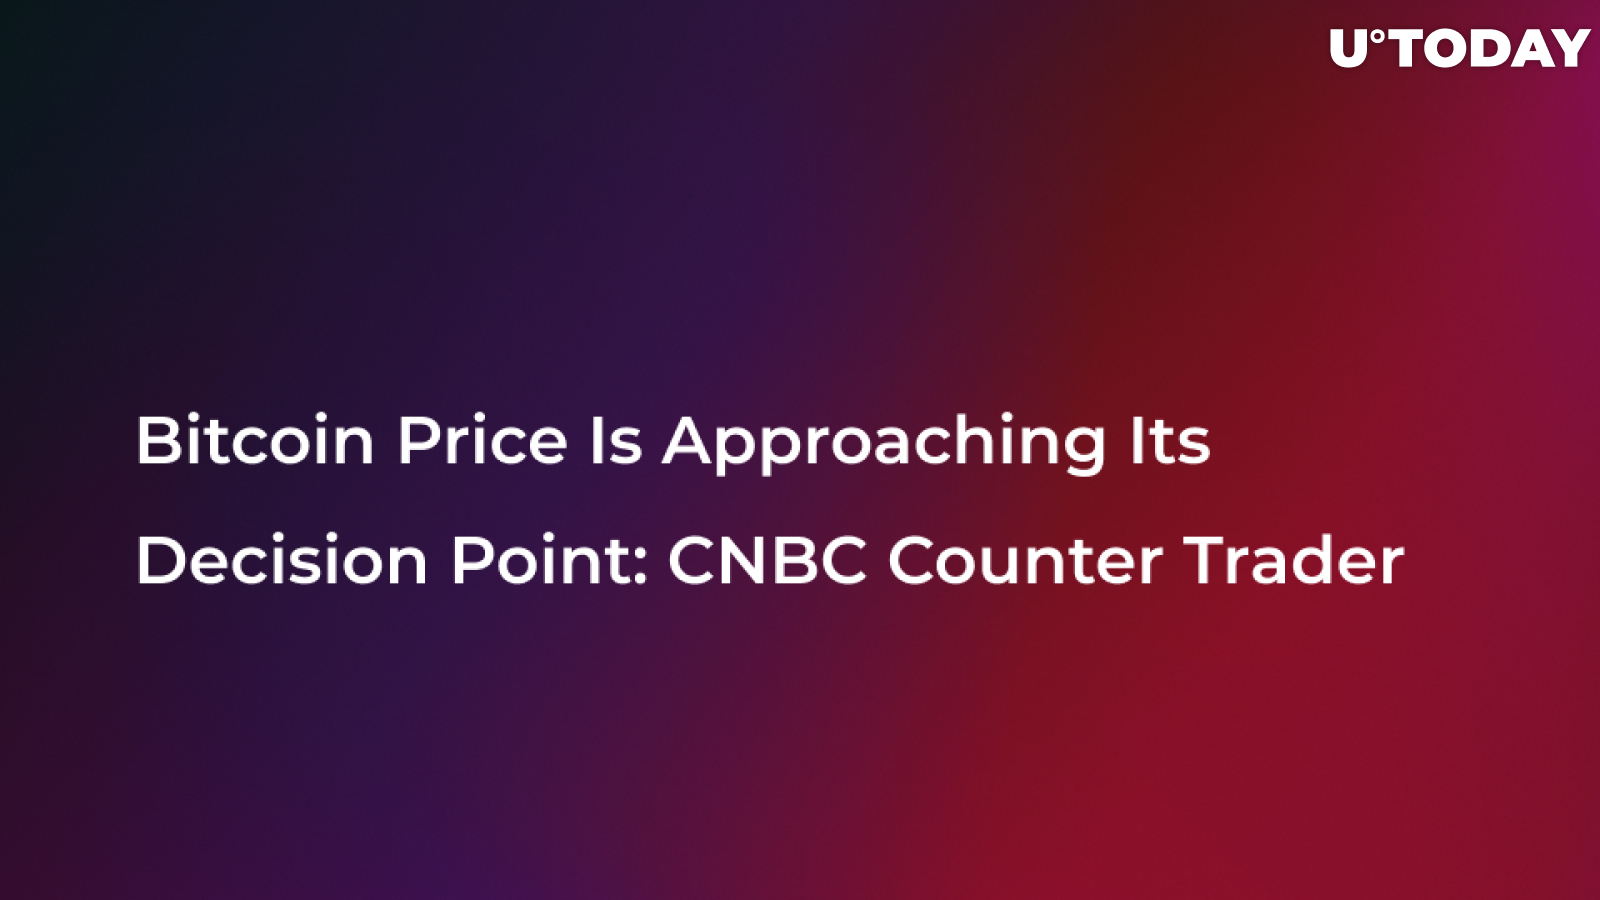 Bitcoin Price Is Approaching Its Decision Point: CNBC Counter Trader